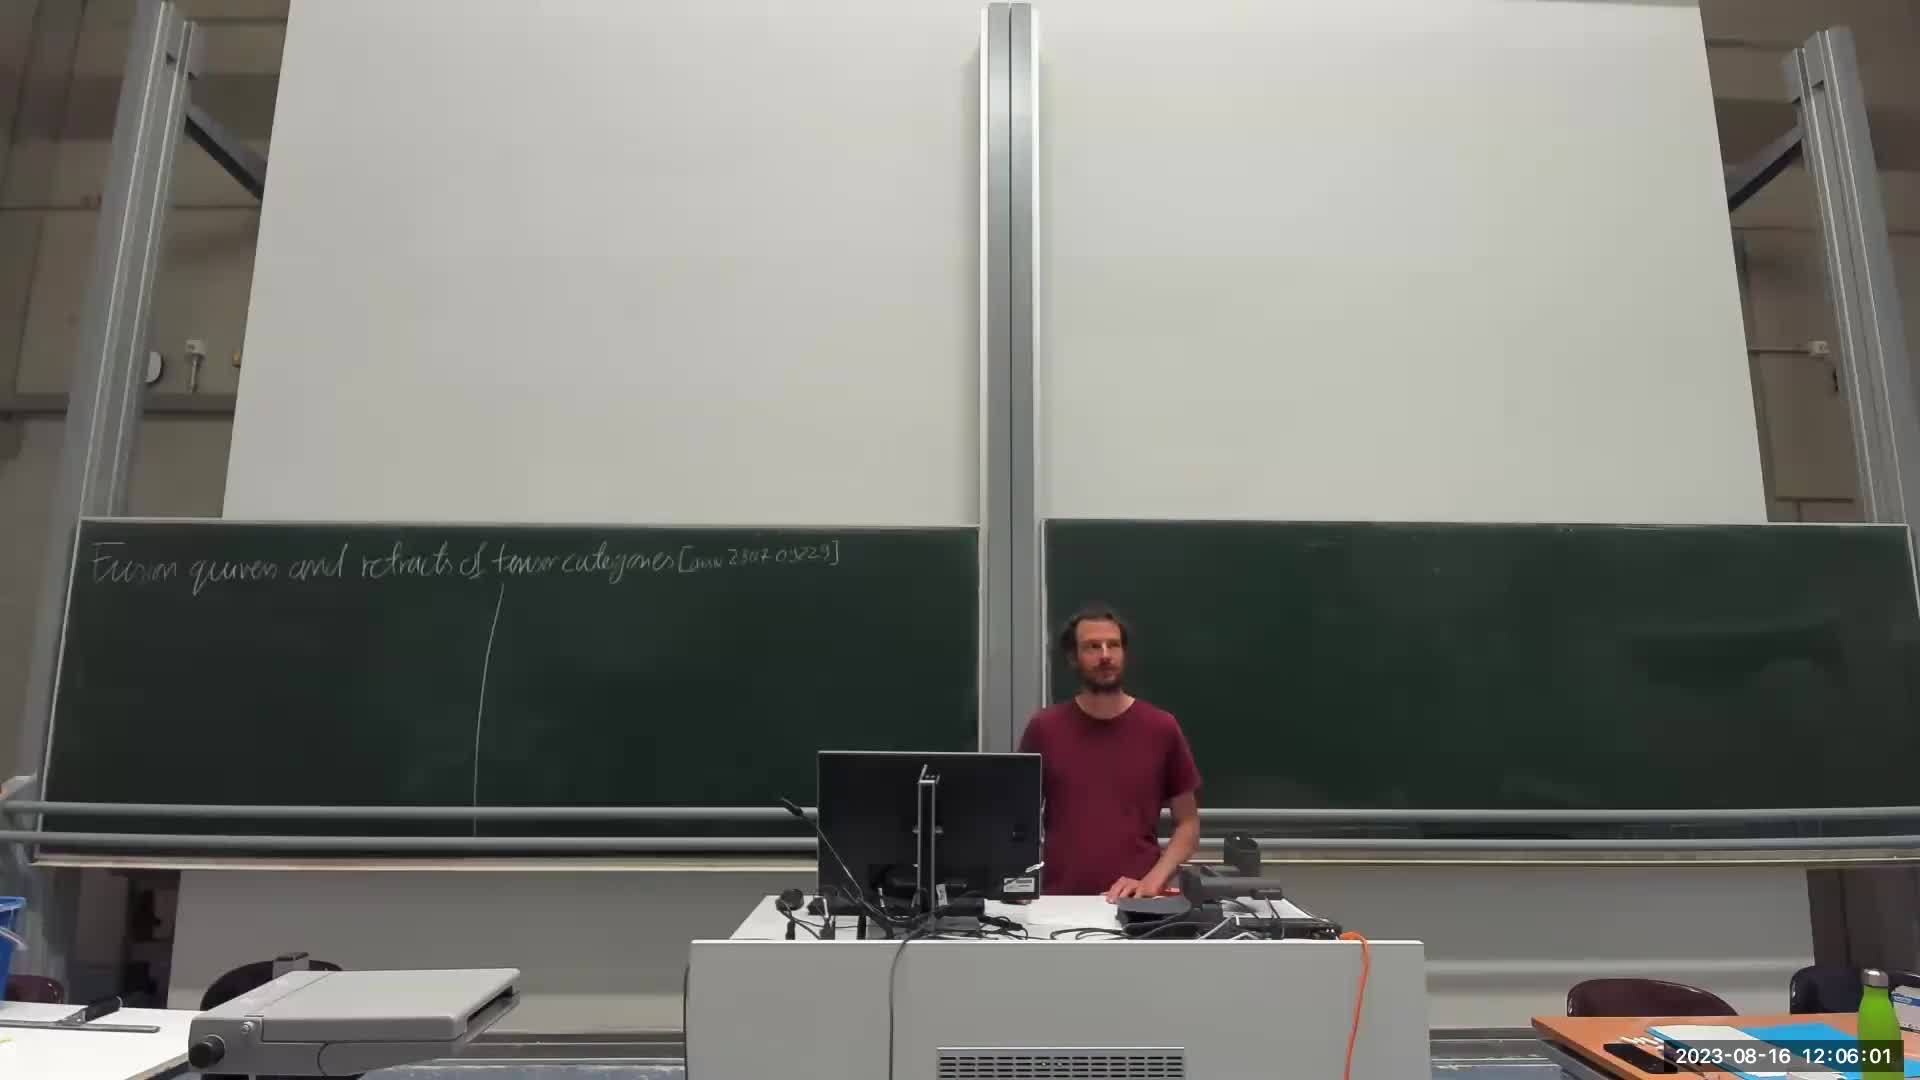 Gregor Schaumann: Fusion quivers and retracts of tensor categories